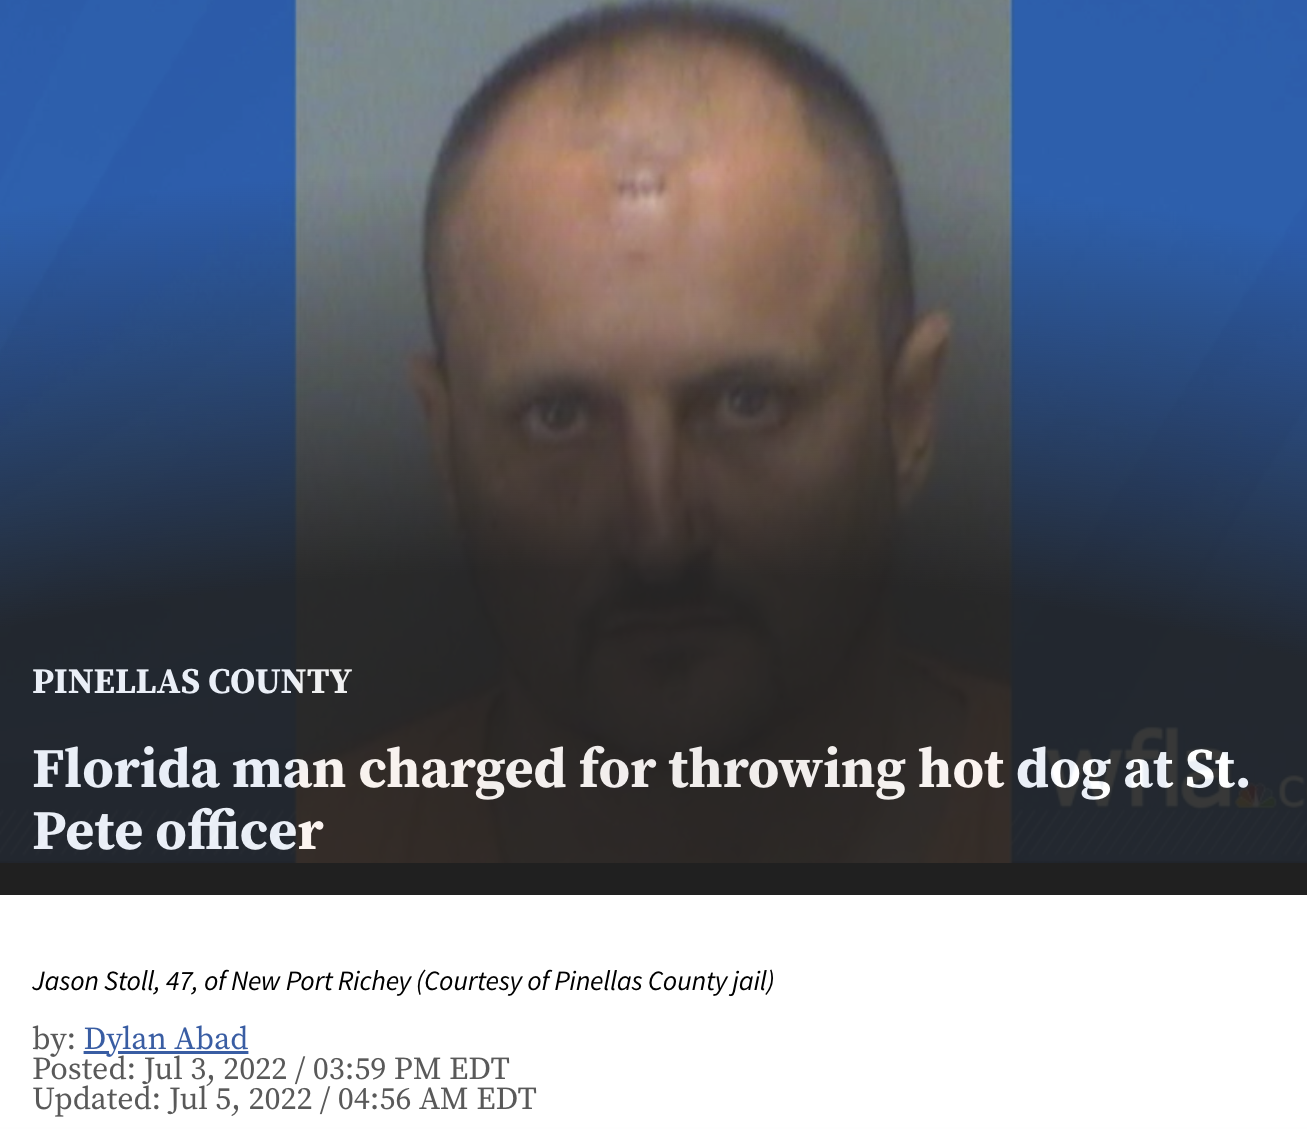 Best of Florida Man 2022 - head - Pinellas County Florida man charged for throwing hot dog at St. Pete officer Jason Stoll, 47, of New Port Richey Courtesy of Pinellas County jail by Dylan Abad Posted Edt Updated Edt